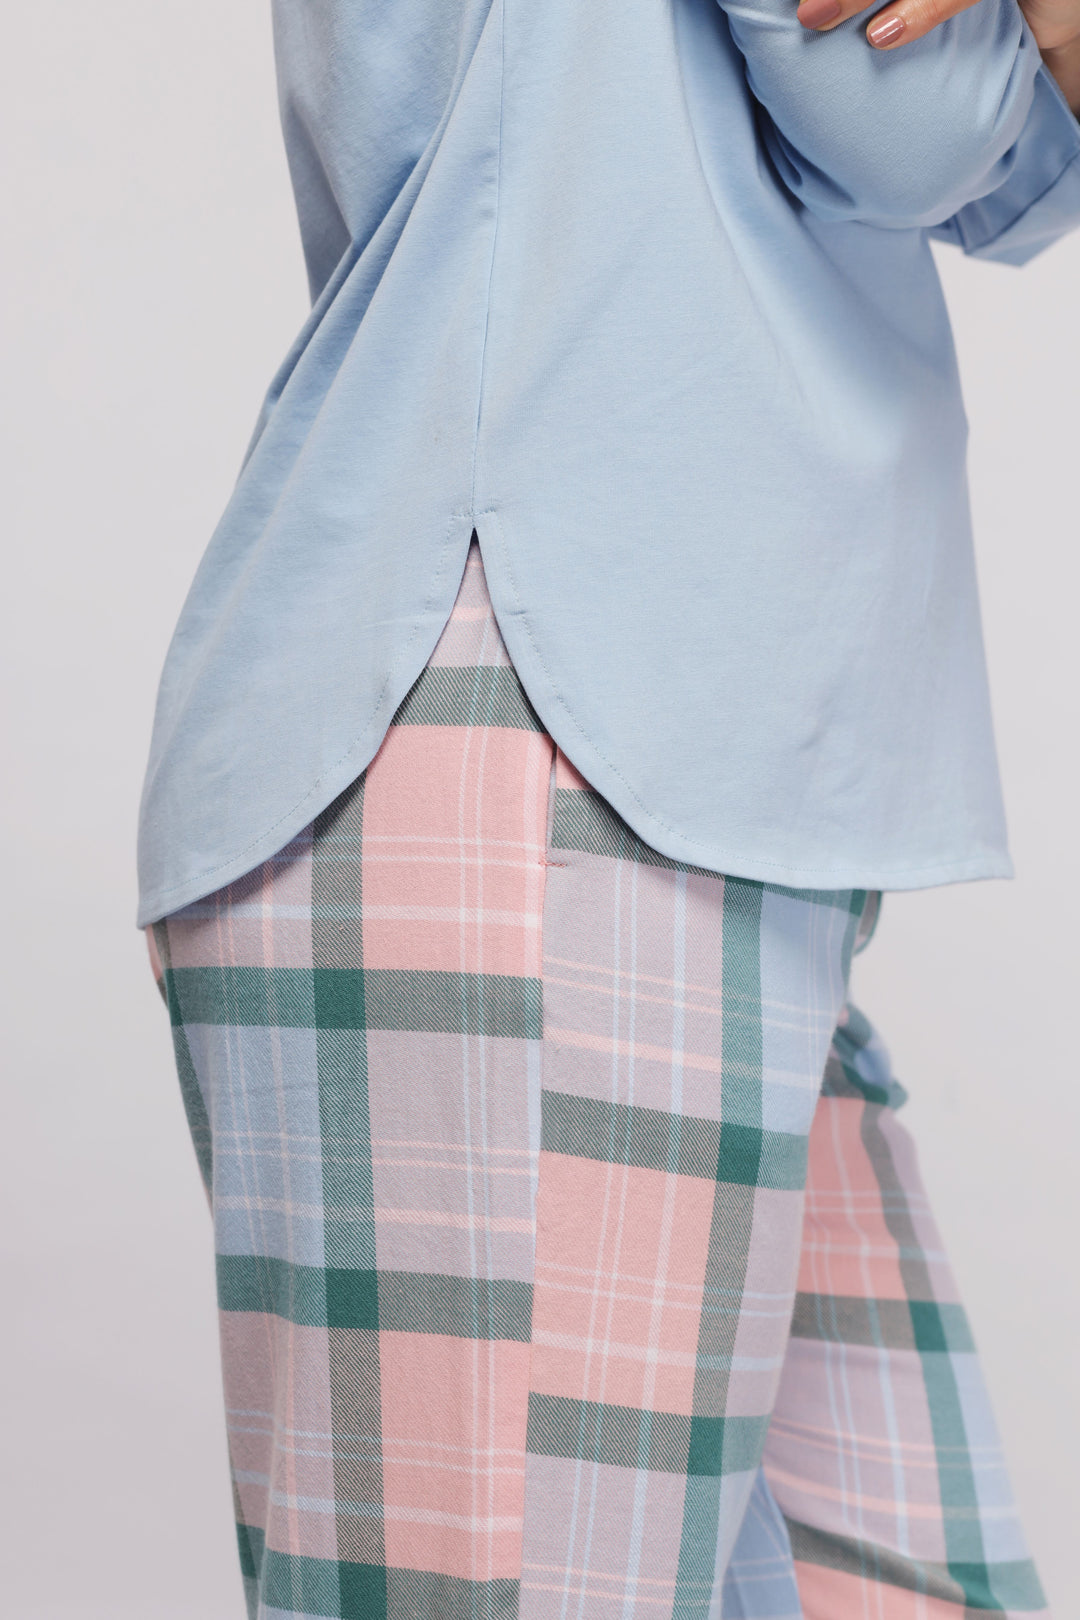 Plaid Flannel Pajama Set with Blue Top